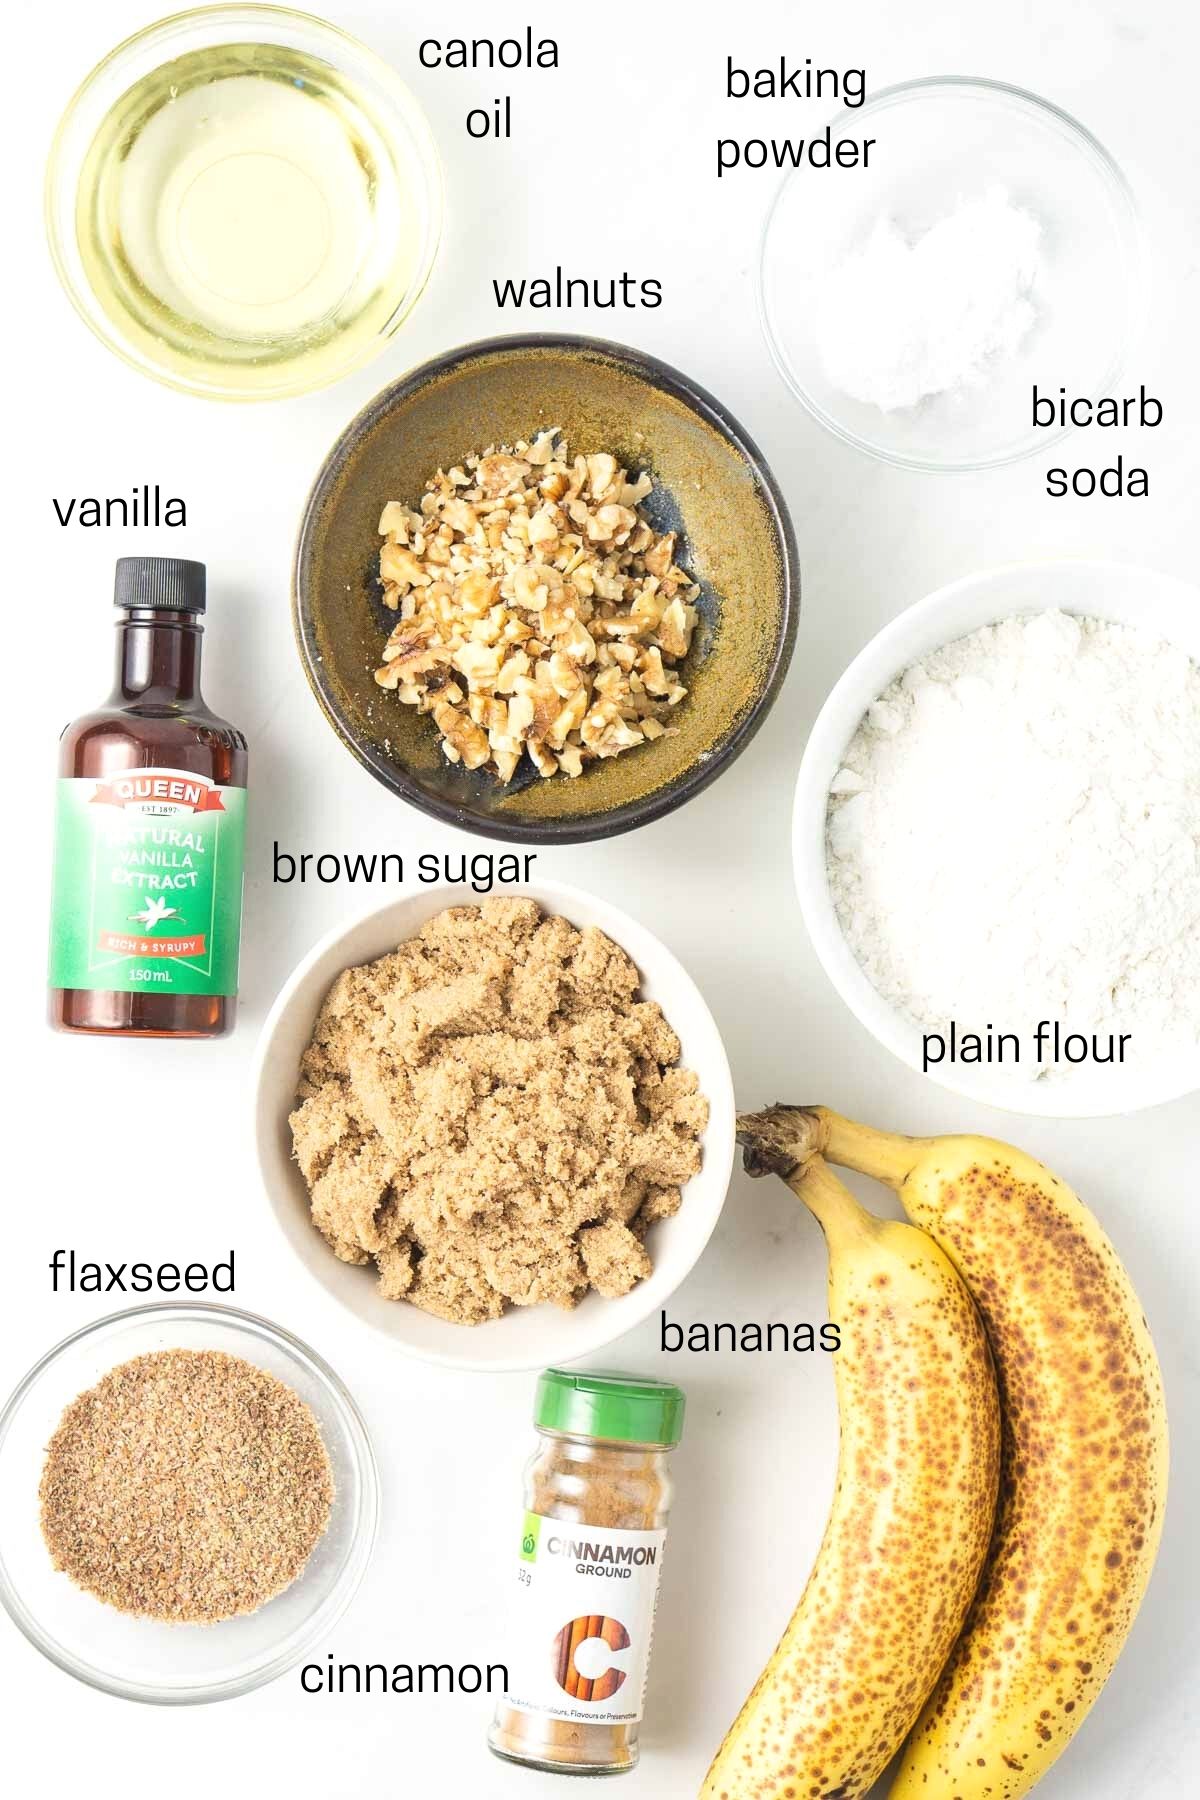 All ingredients needed to make vegan banana bread laid out in small bowls.